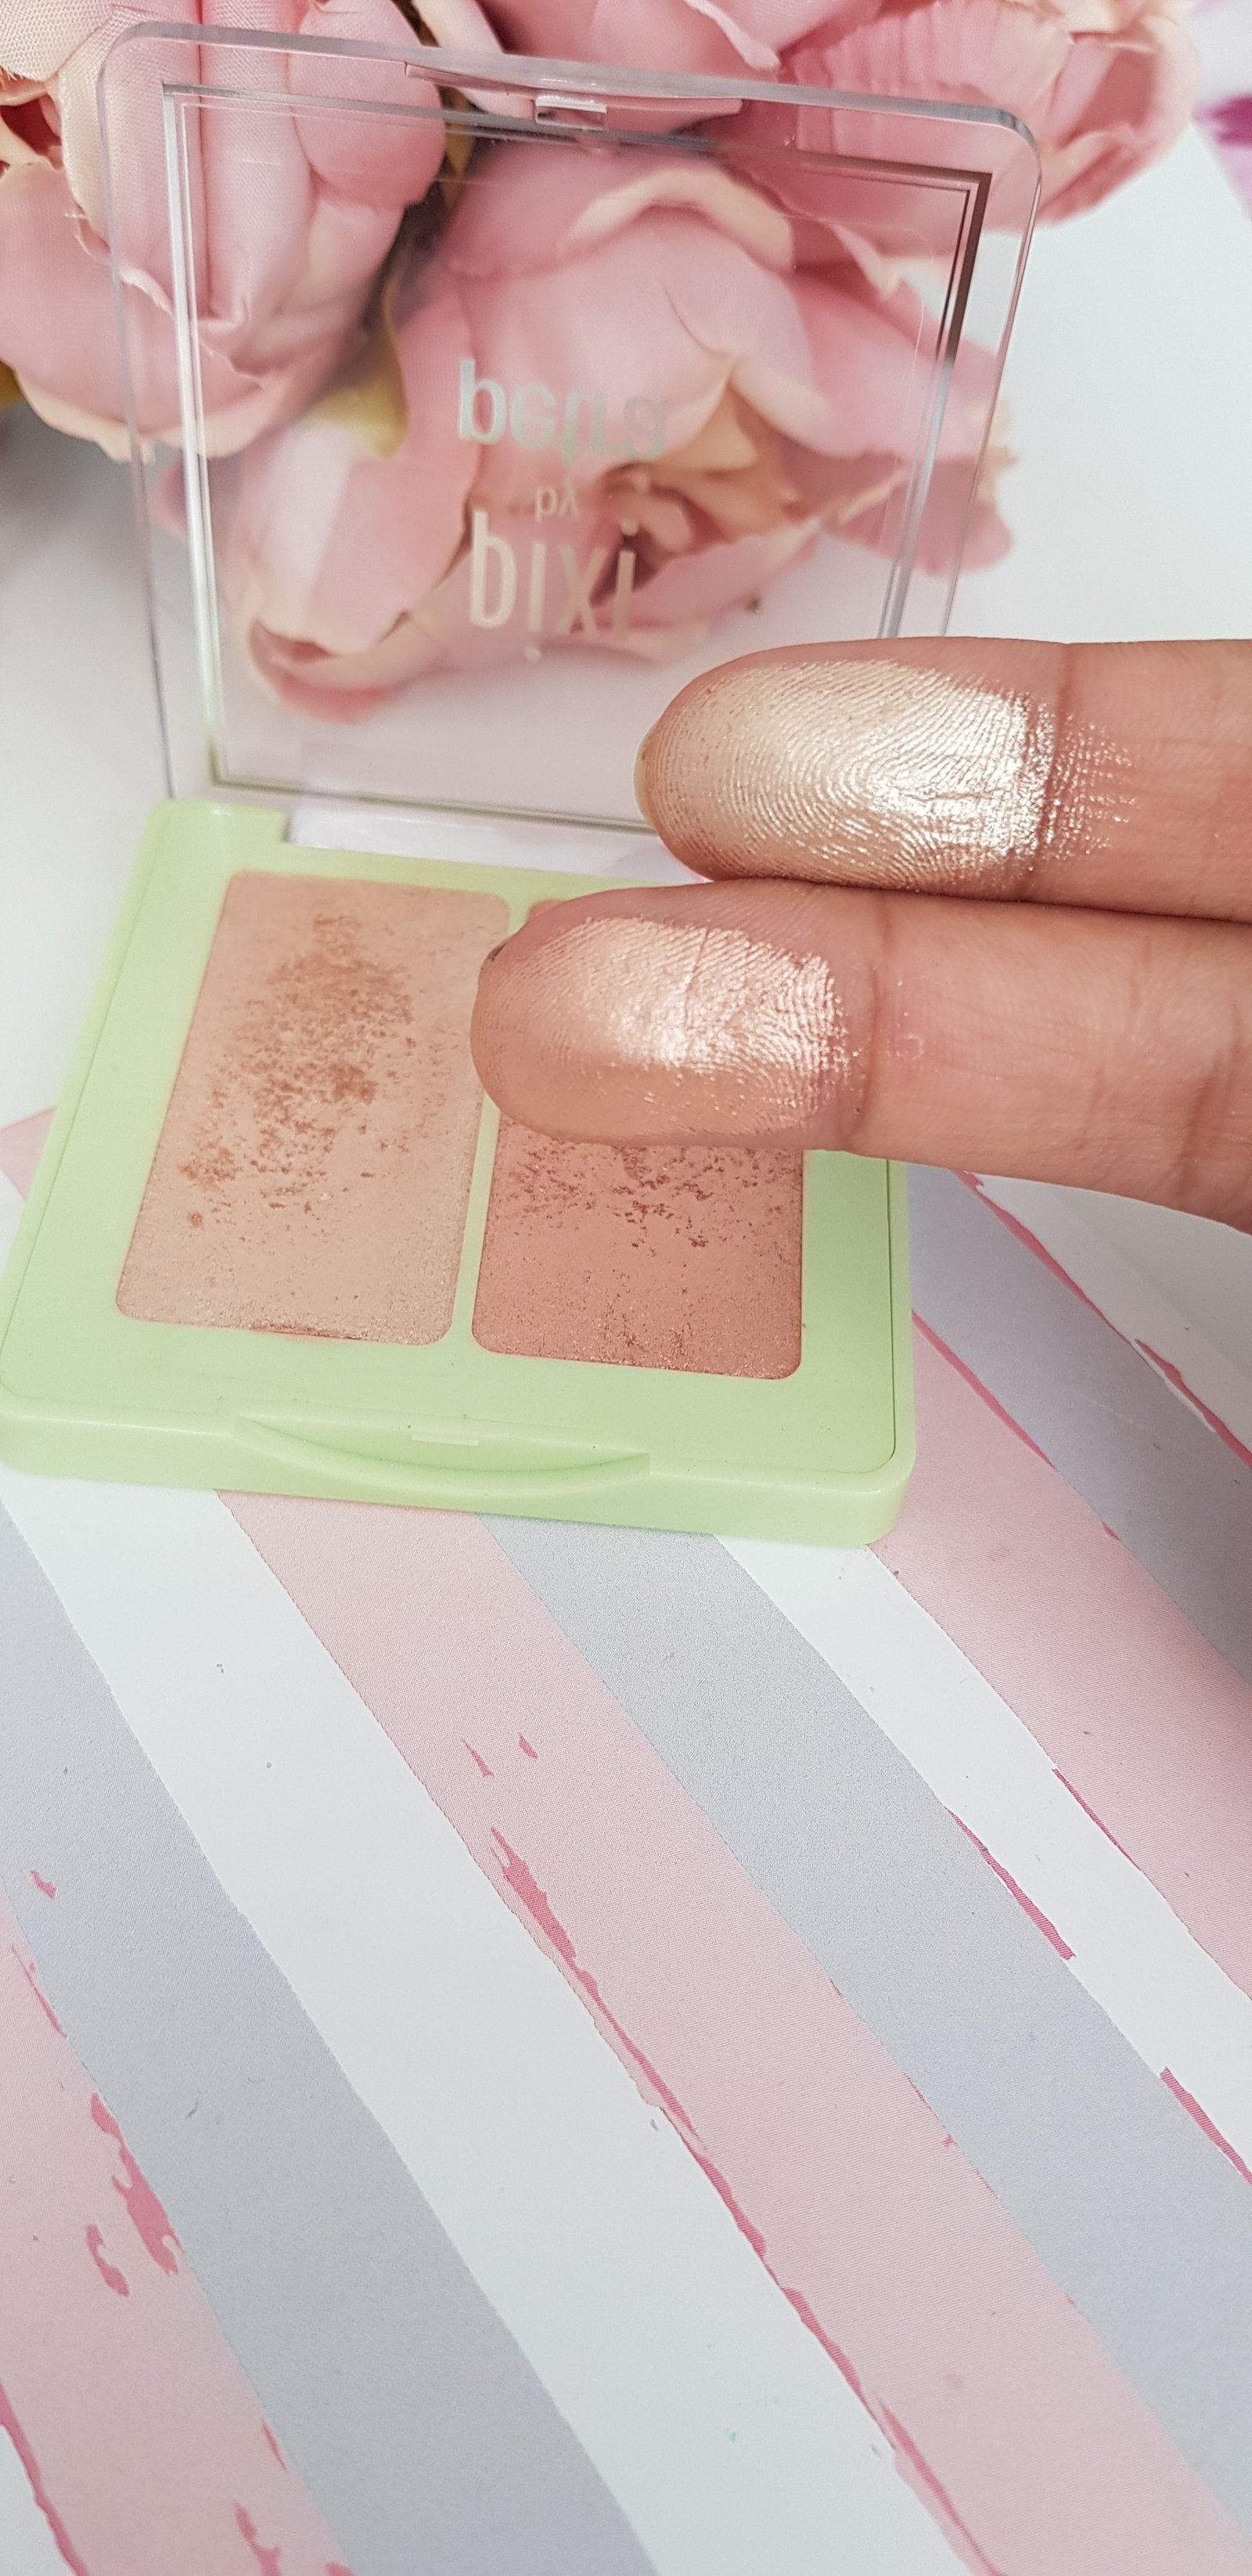 Pixi Beauty Glow in a Box - Glow-y Gossamer Duo highlighters - Ms Tantrum Blog